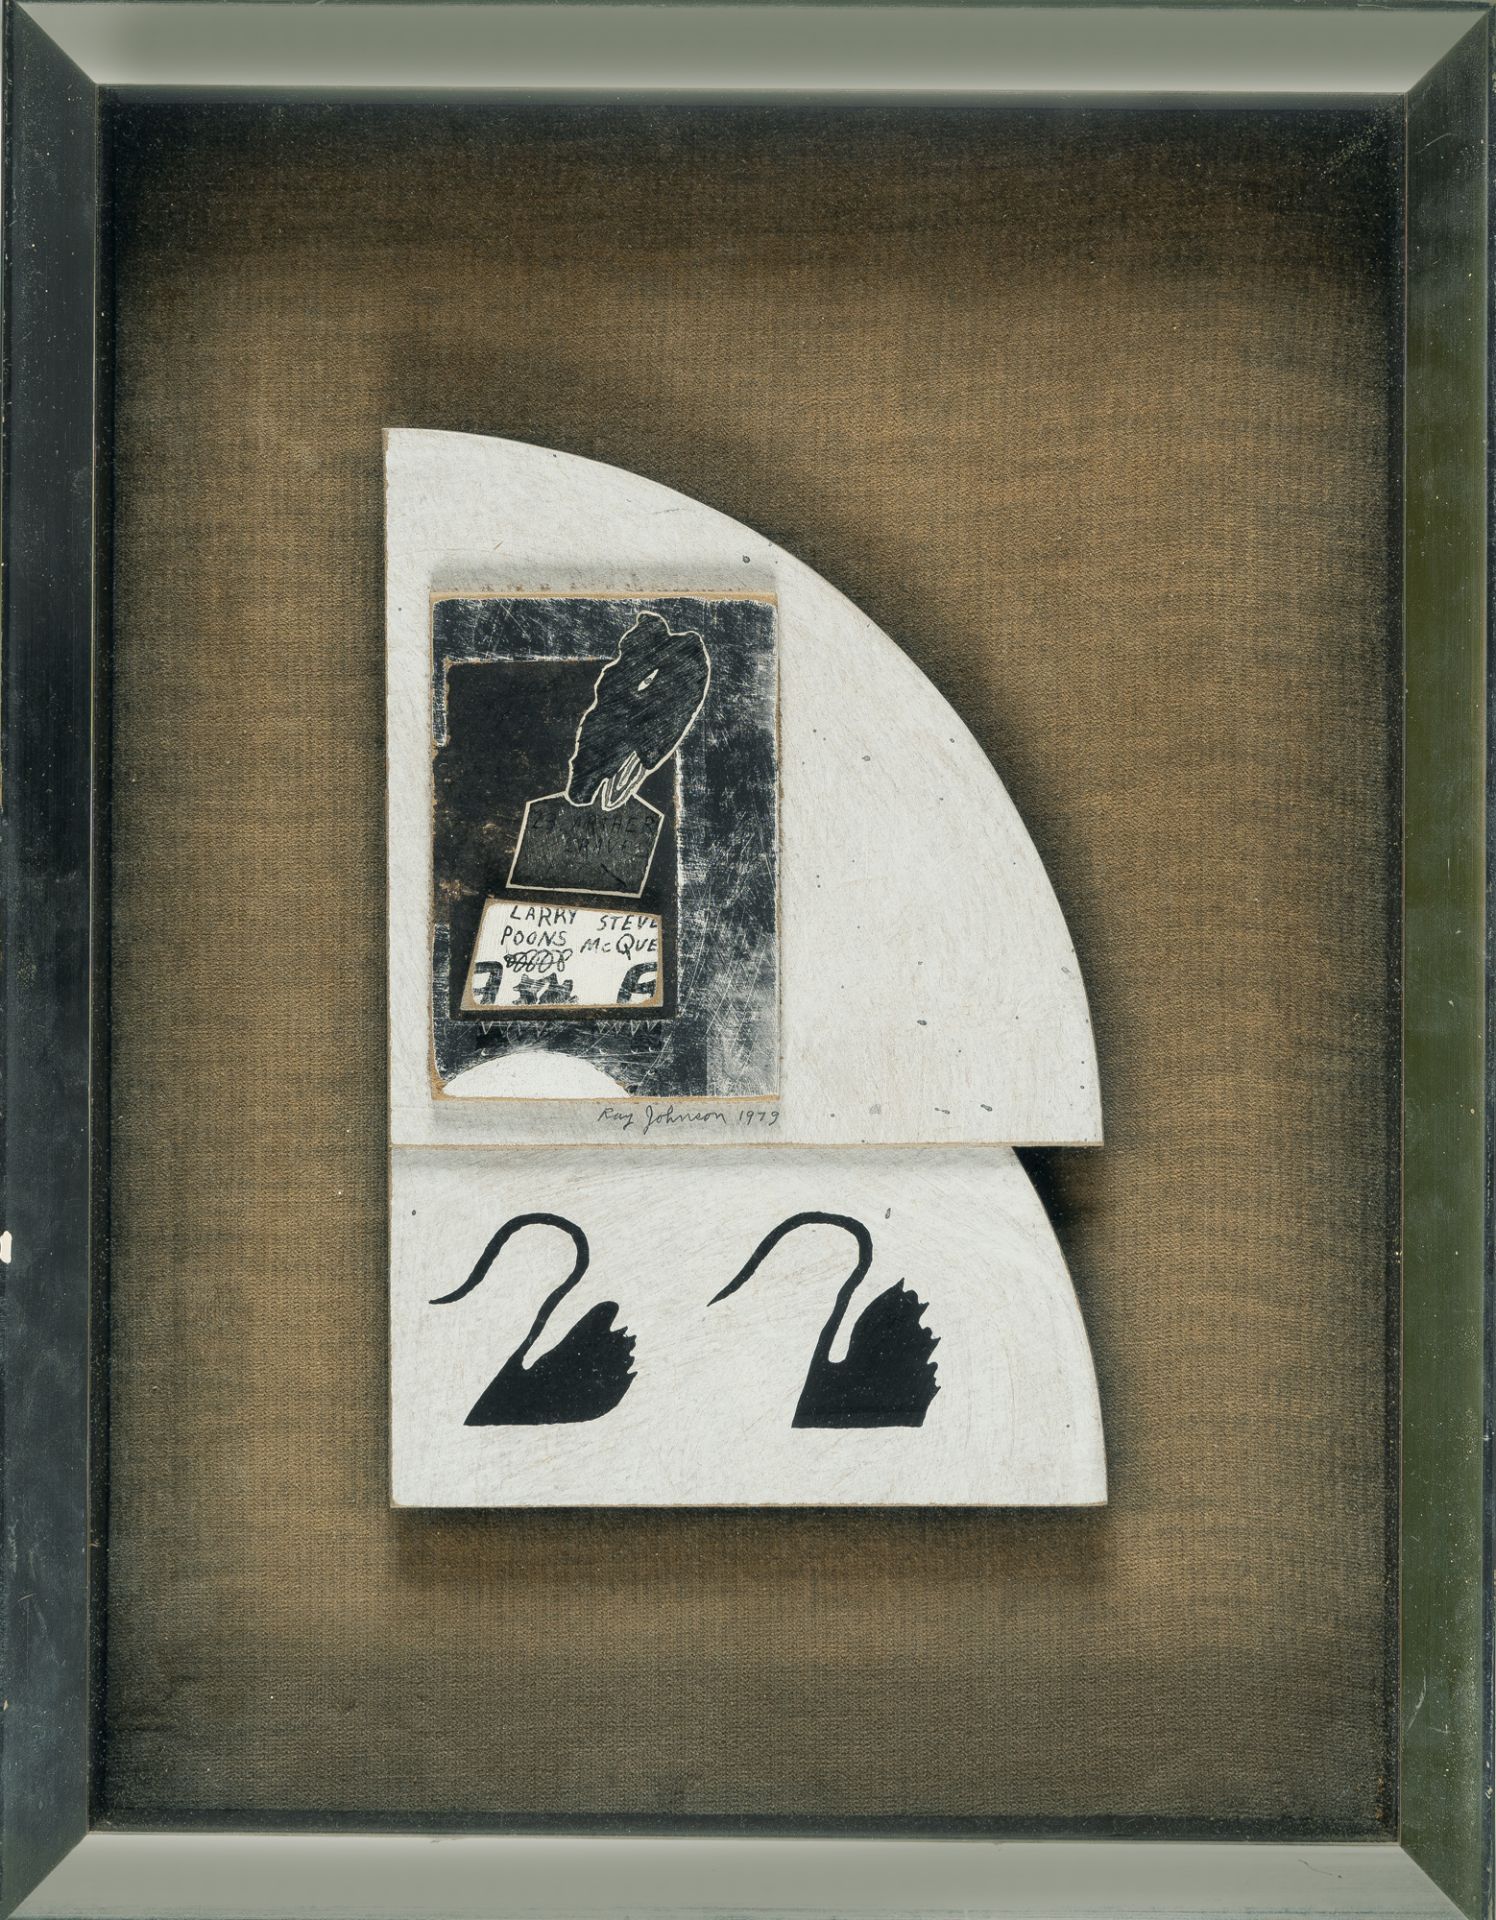 Ray Johnson, Larry Poons Steve McQue(en).Collage with firm cardboard, paper, acrylic and Indian - Image 4 of 4